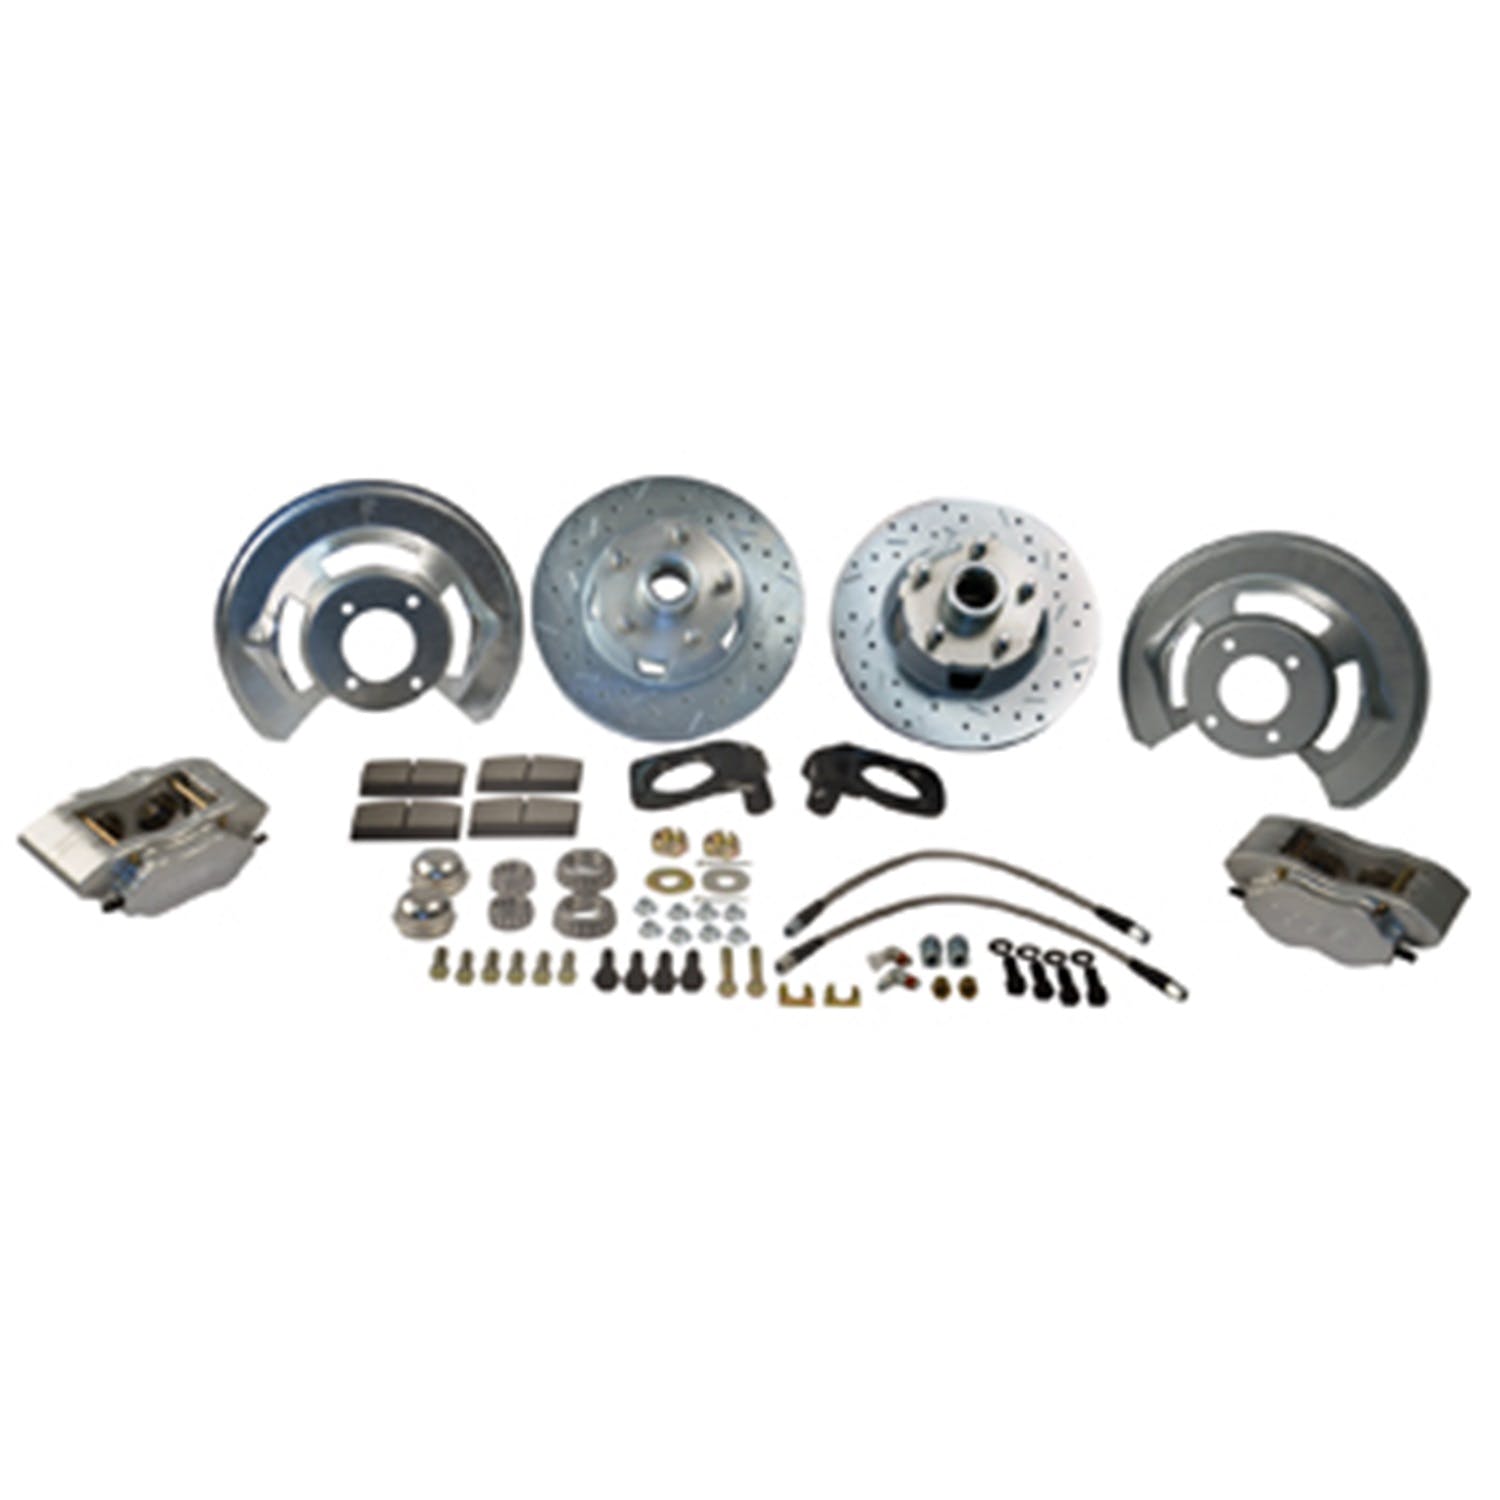 Stainless Steel Brakes W120-23 At The Wheels Comp S front 64-1/2-69 Mustang drum to disc